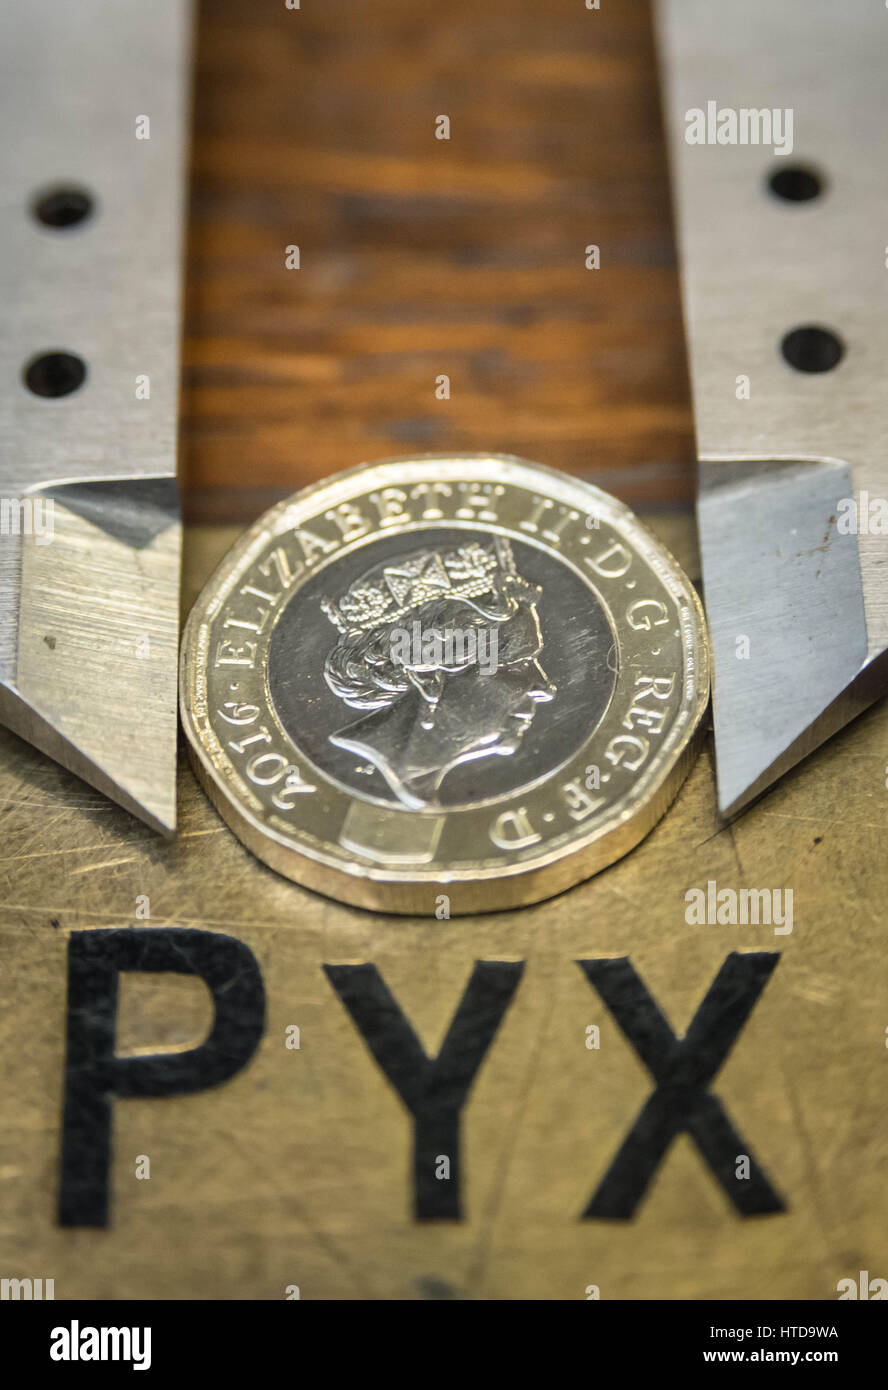 London, UK. 9th Mar, 2017. New £1 coins tested in the London Assay office ahead of their release 28th March, 2017. Pictured: In the Assay office, new £1 coins on the Pyx box, awaiting their trial. The Coins are the Realm are tested by diameter, weight and composition. Credit: Guy Corbishley/Alamy Live News Stock Photo